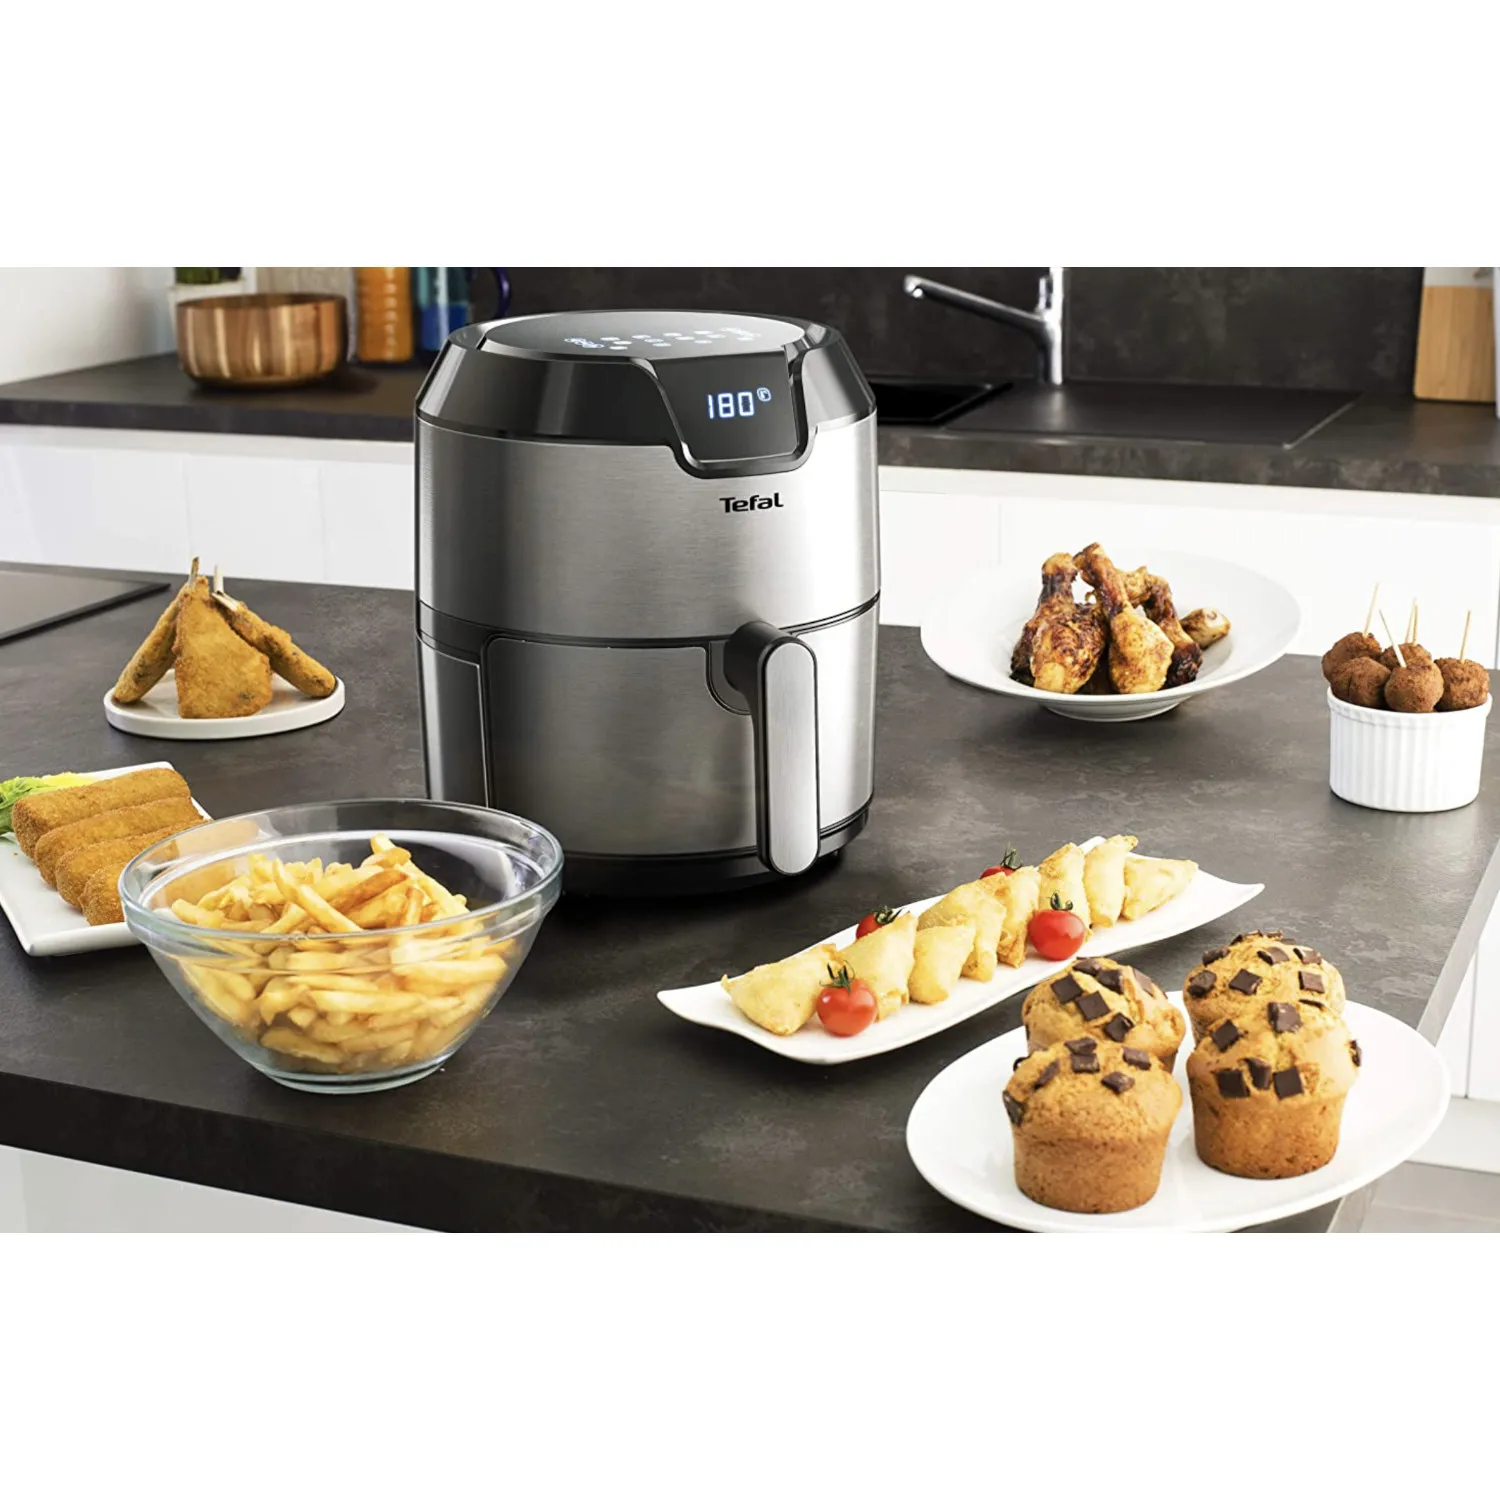 Tefal Easy Fry EY401D oil free air fryer 4,2 L, air fryer, stainless steel,  1500 W, touch Control, LCD screen, 4 modes cooking, Easy cleaning